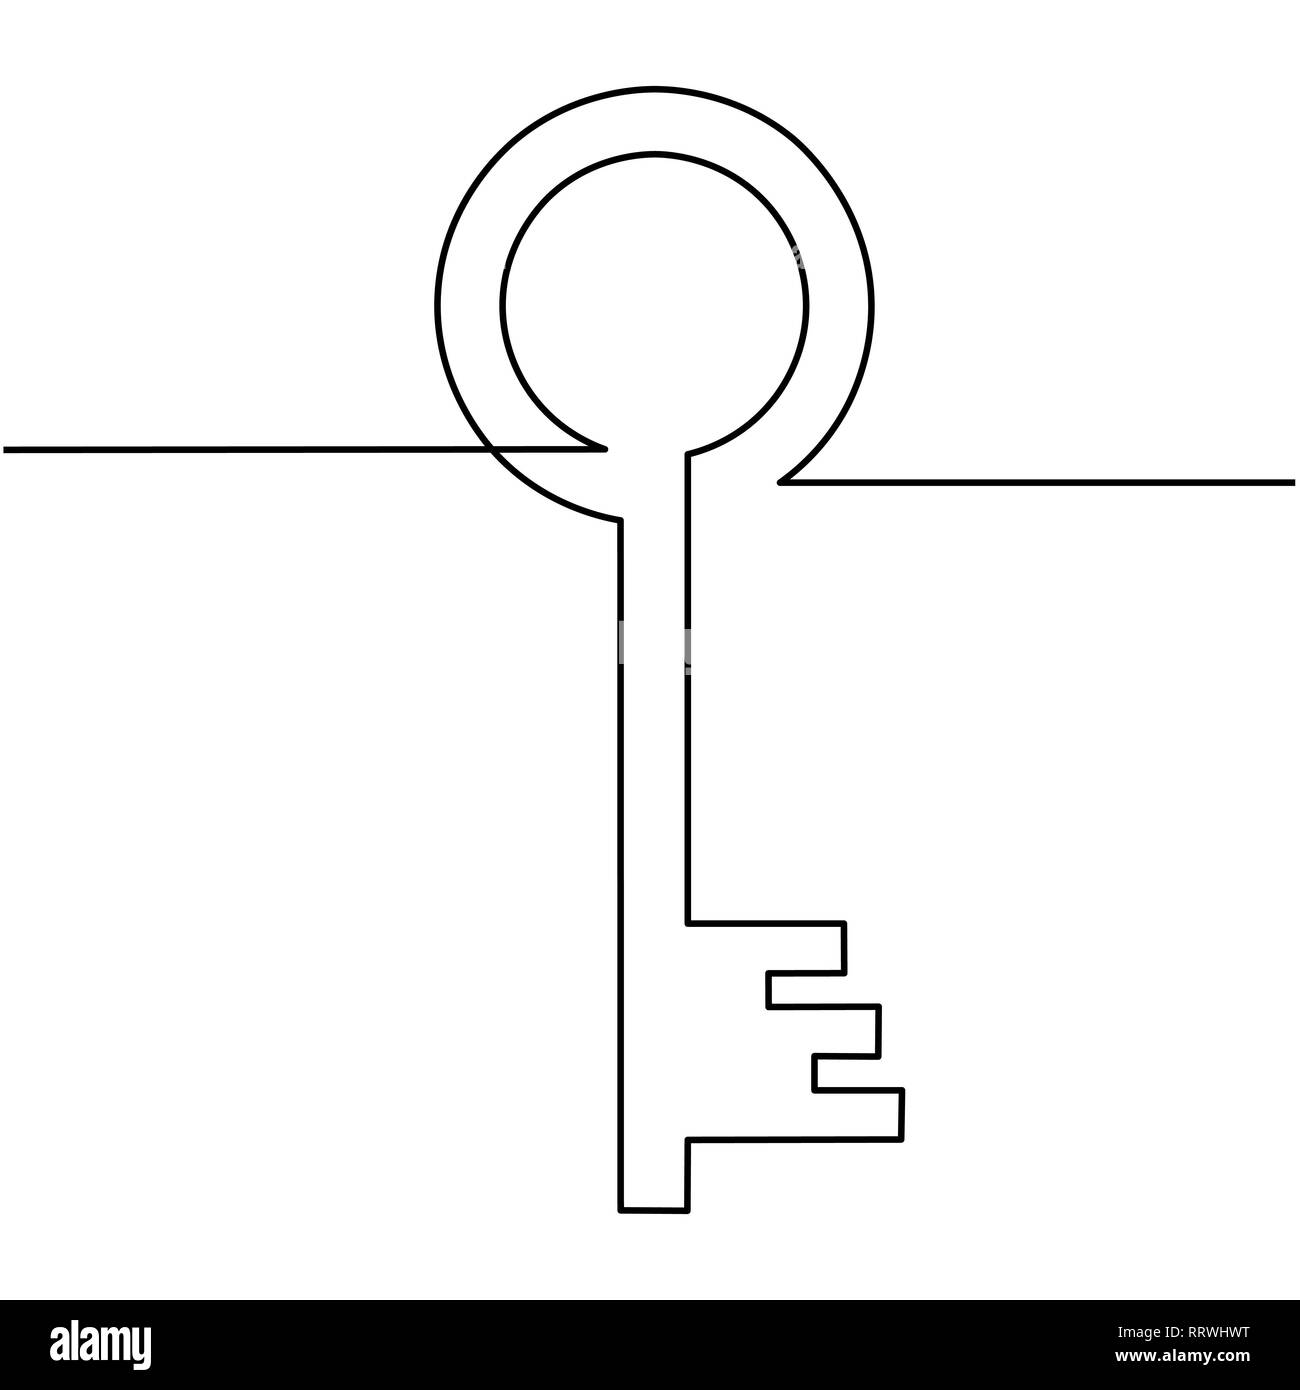 one line drawing of isolated vector object - old key Stock Vector